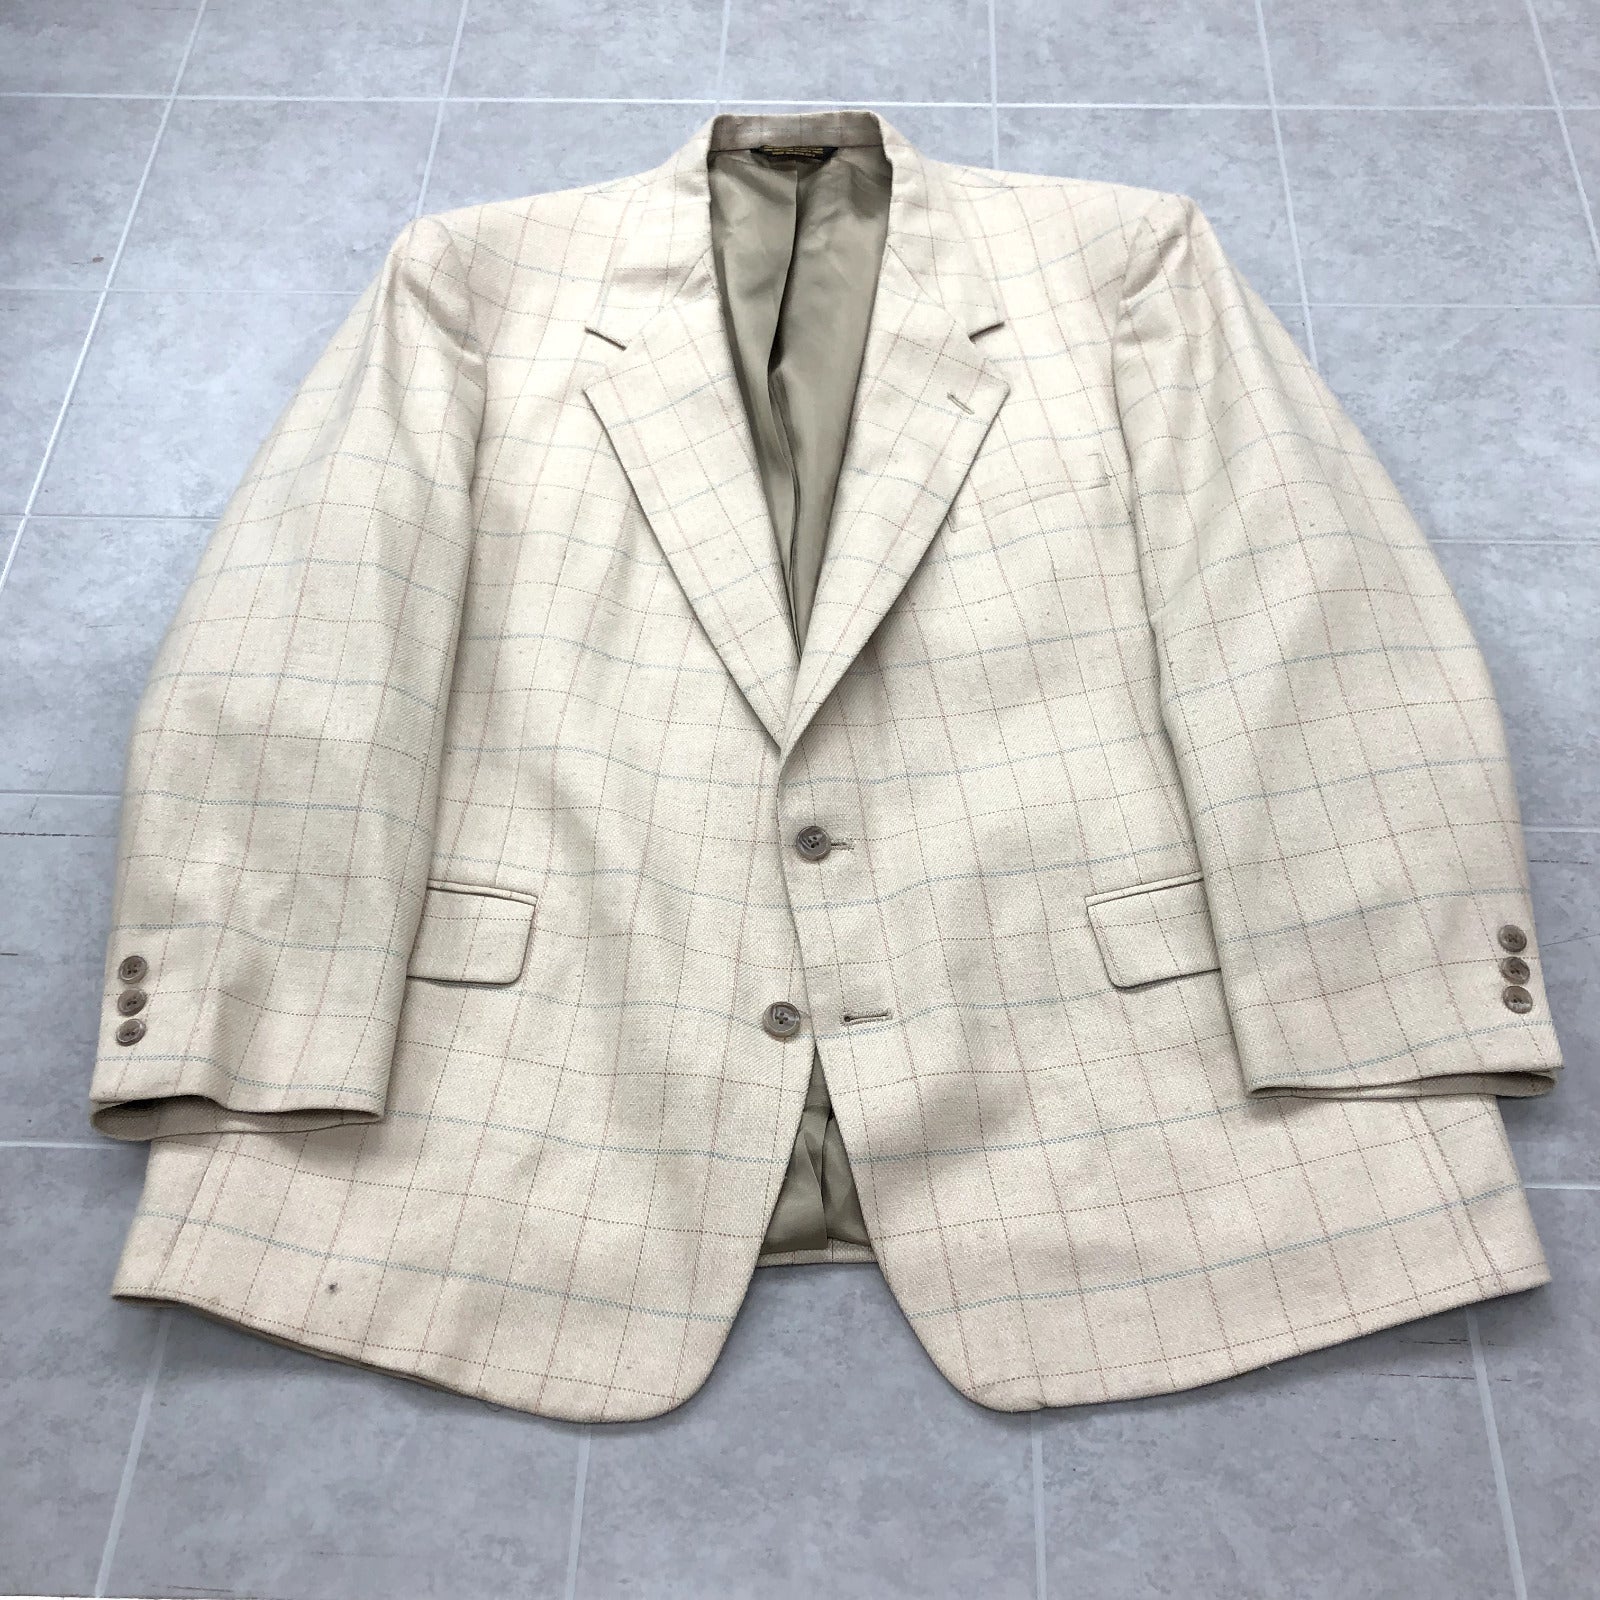 Vintage Ivory Plaid Lined Single Breasted Notch Lapel Blazer Adult Size 48R